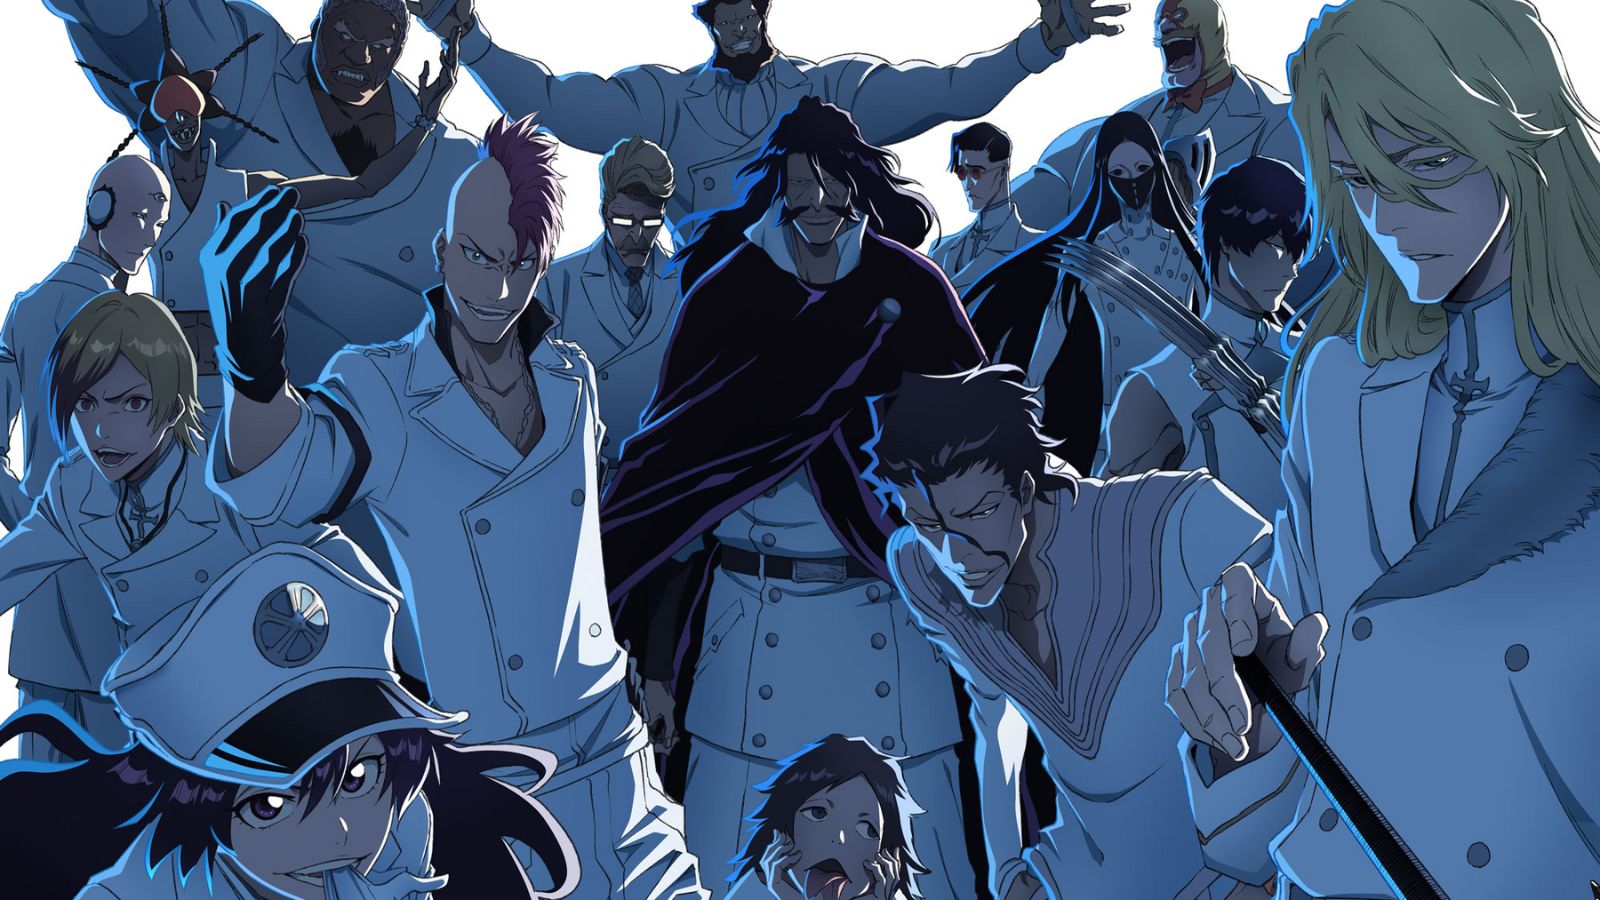 The 5 strongest characters in Bleach | ONE Esports